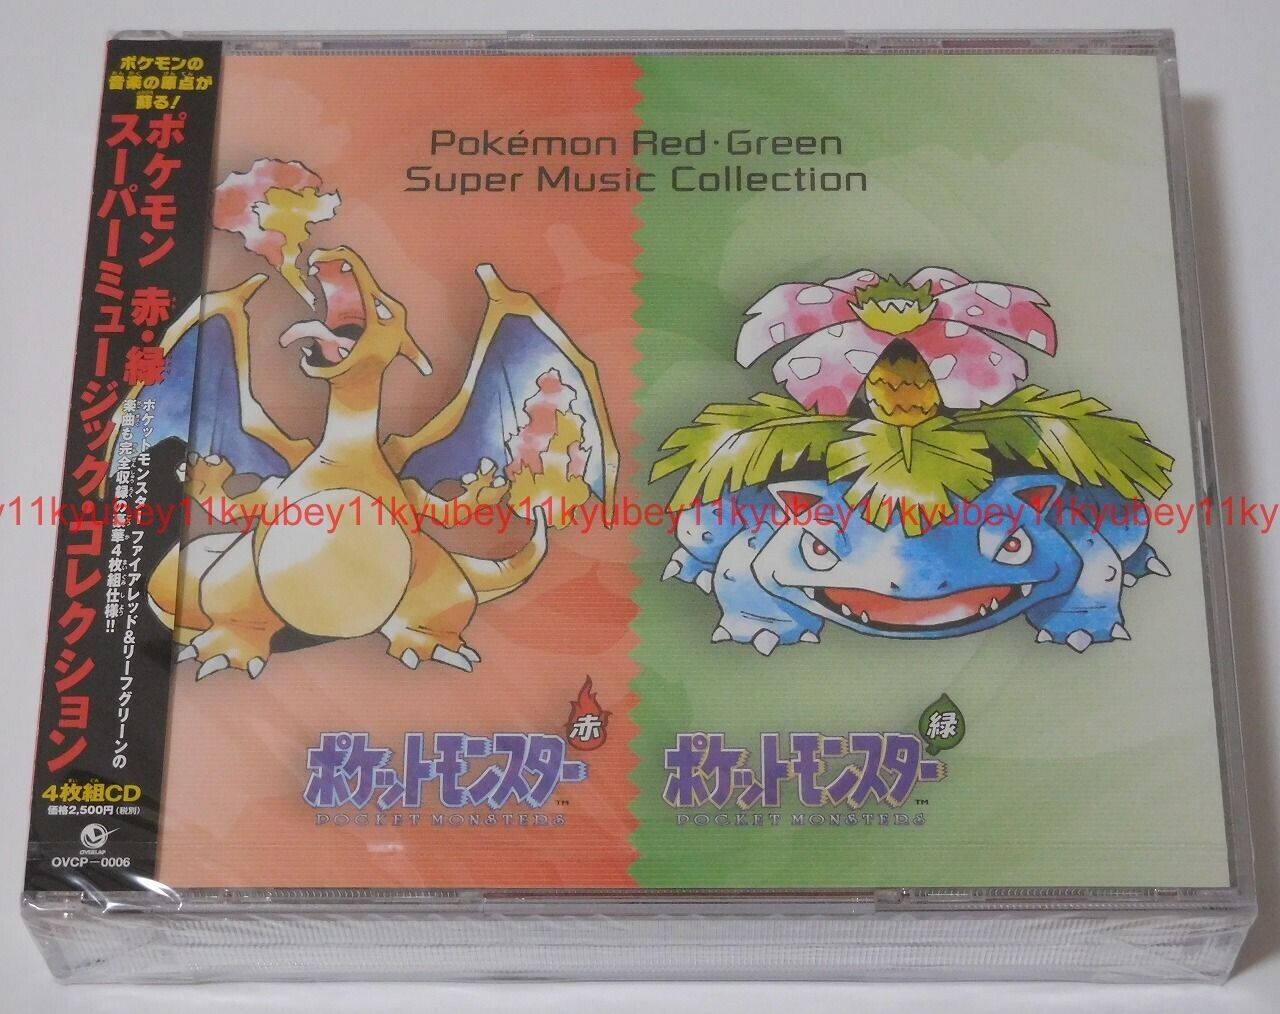 Pocket Monster Pokemon Red Green FireRed LeafGreen Super Music Collection 4 CD